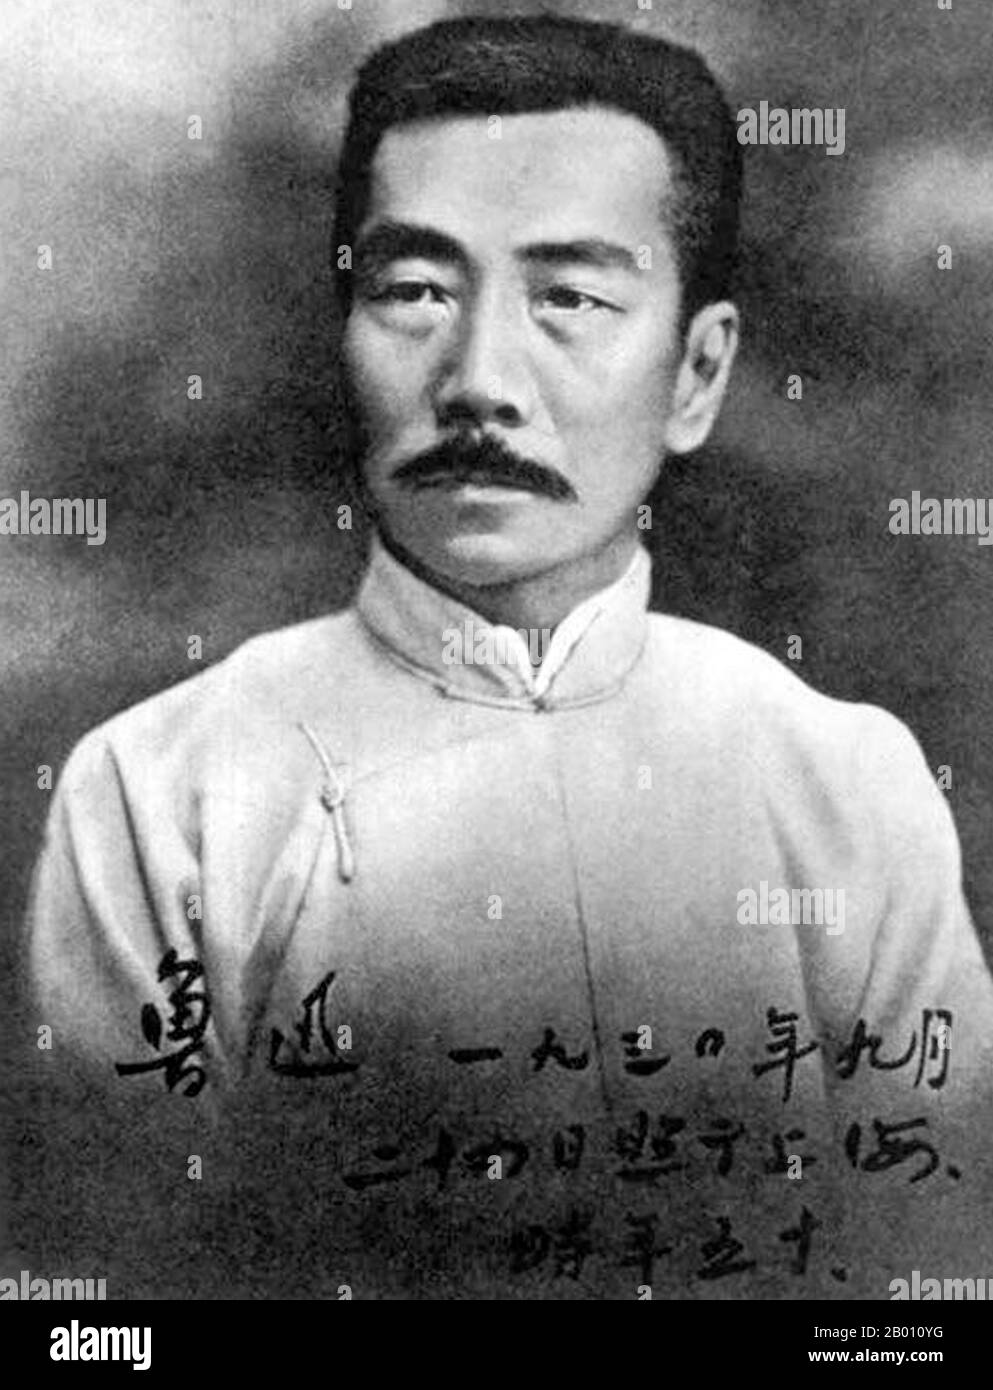 China: The Chinese writer Lu Xun (1881-1936), 20th century.  Lu Xun (or Lu Hsun), was the pen name of Zhou Shuren (Chou Shu-jen), September 25, 1881 – October 19, 1936. One of the major Chinese writers of the 20th century. Considered by many to be the founder of modern Chinese literature, he wrote in baihua (the vernacular) as well as classical Chinese. Lu Xun was a short story writer, editor, translator, critic, essayist and poet. In the 1930s he became the titular head of the Chinese League of the Left-Wing Writers in Shanghai. Stock Photo